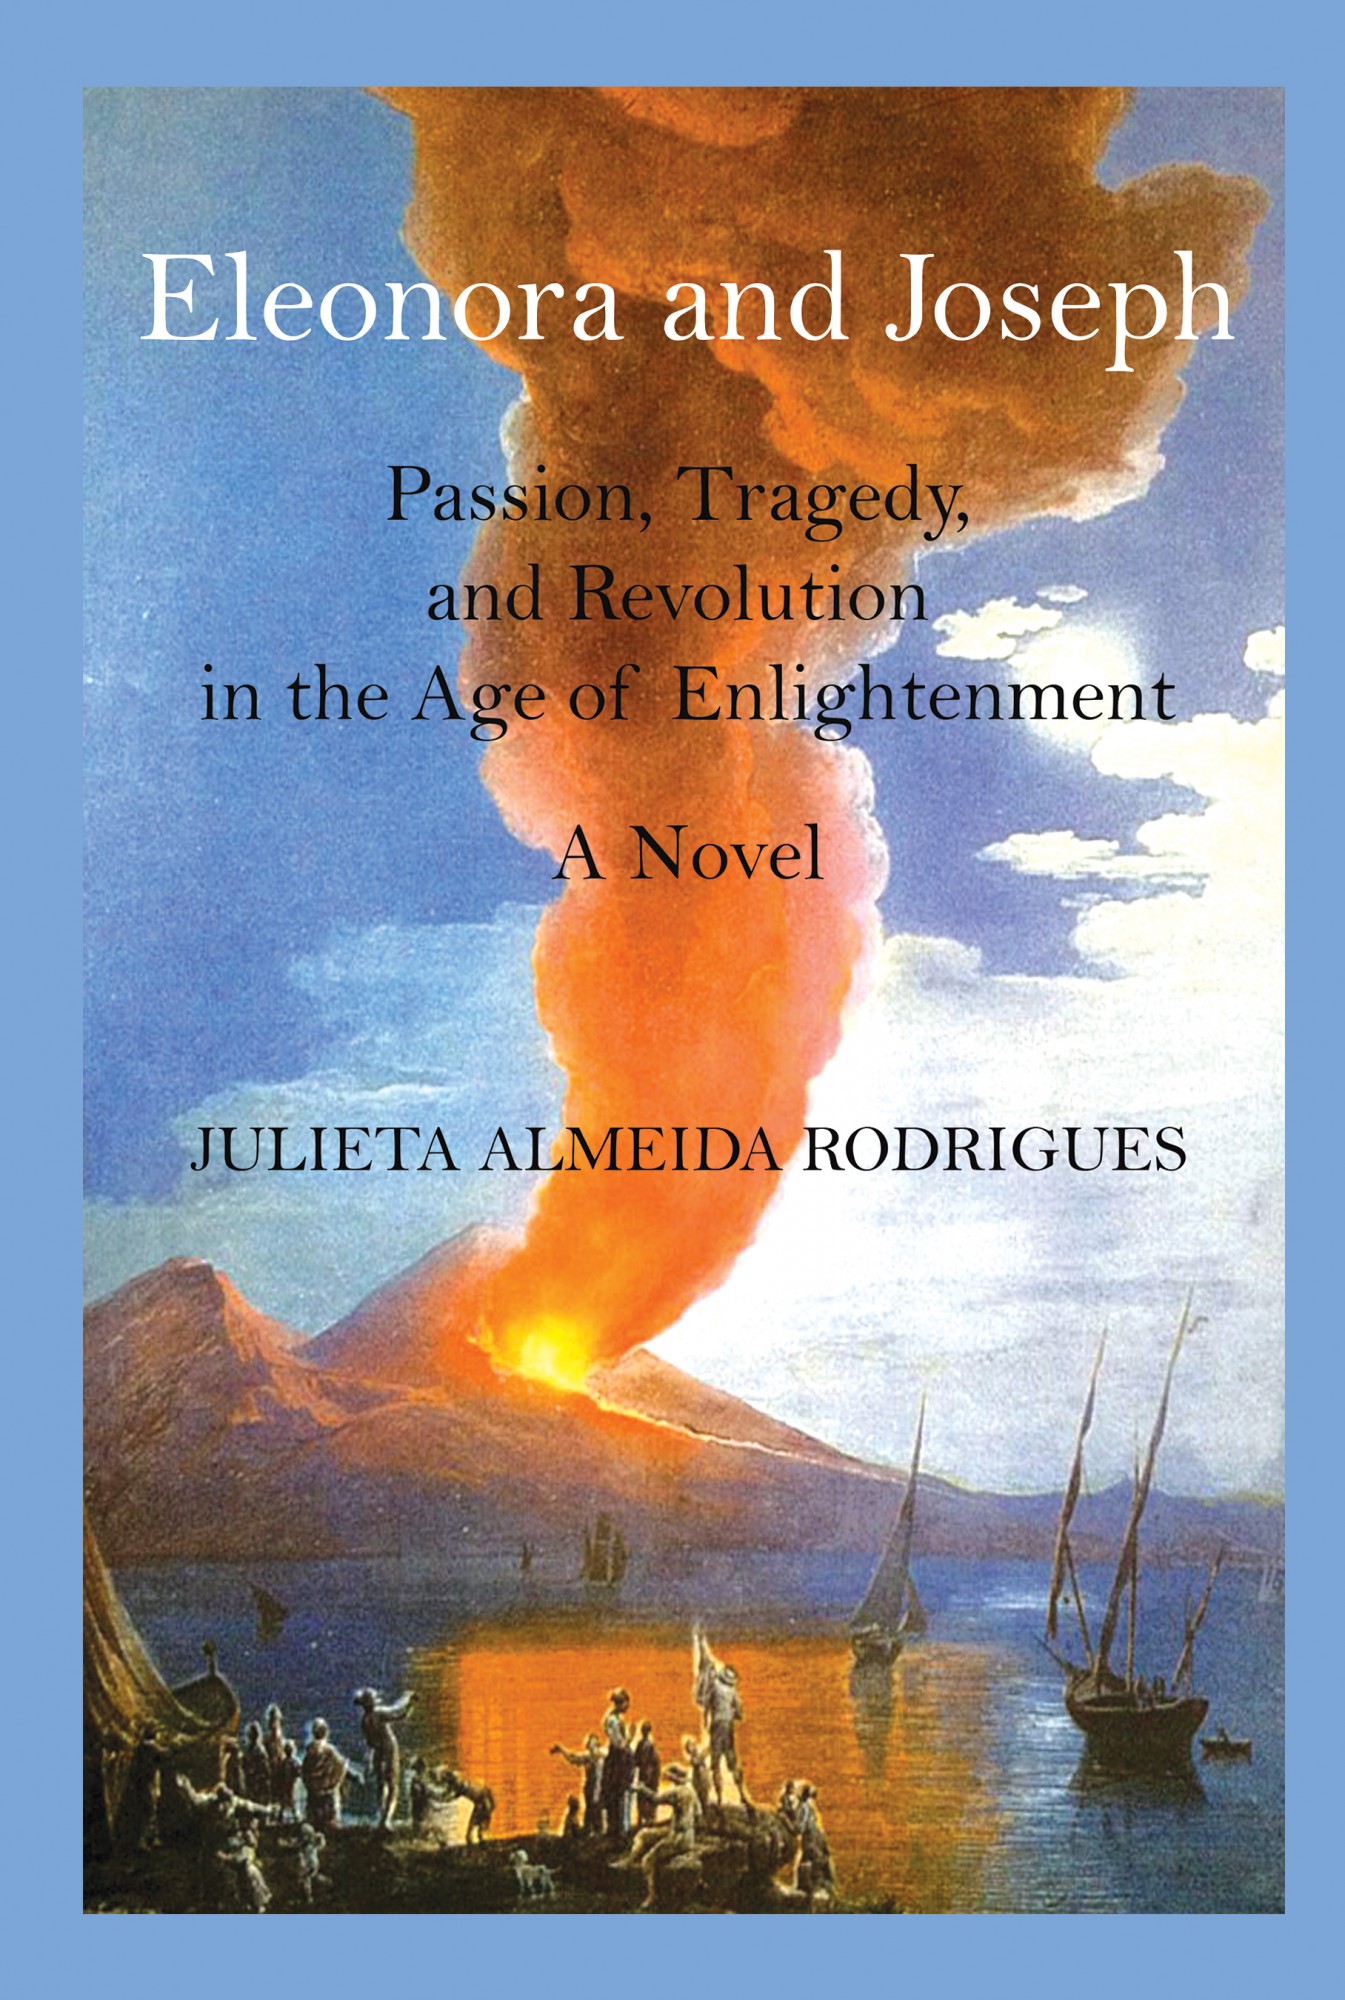 Eleonora and Joseph: Passion, Tragedy, and Revolution in the Age of Enlightenment by Julieta Almeida Rodrigues